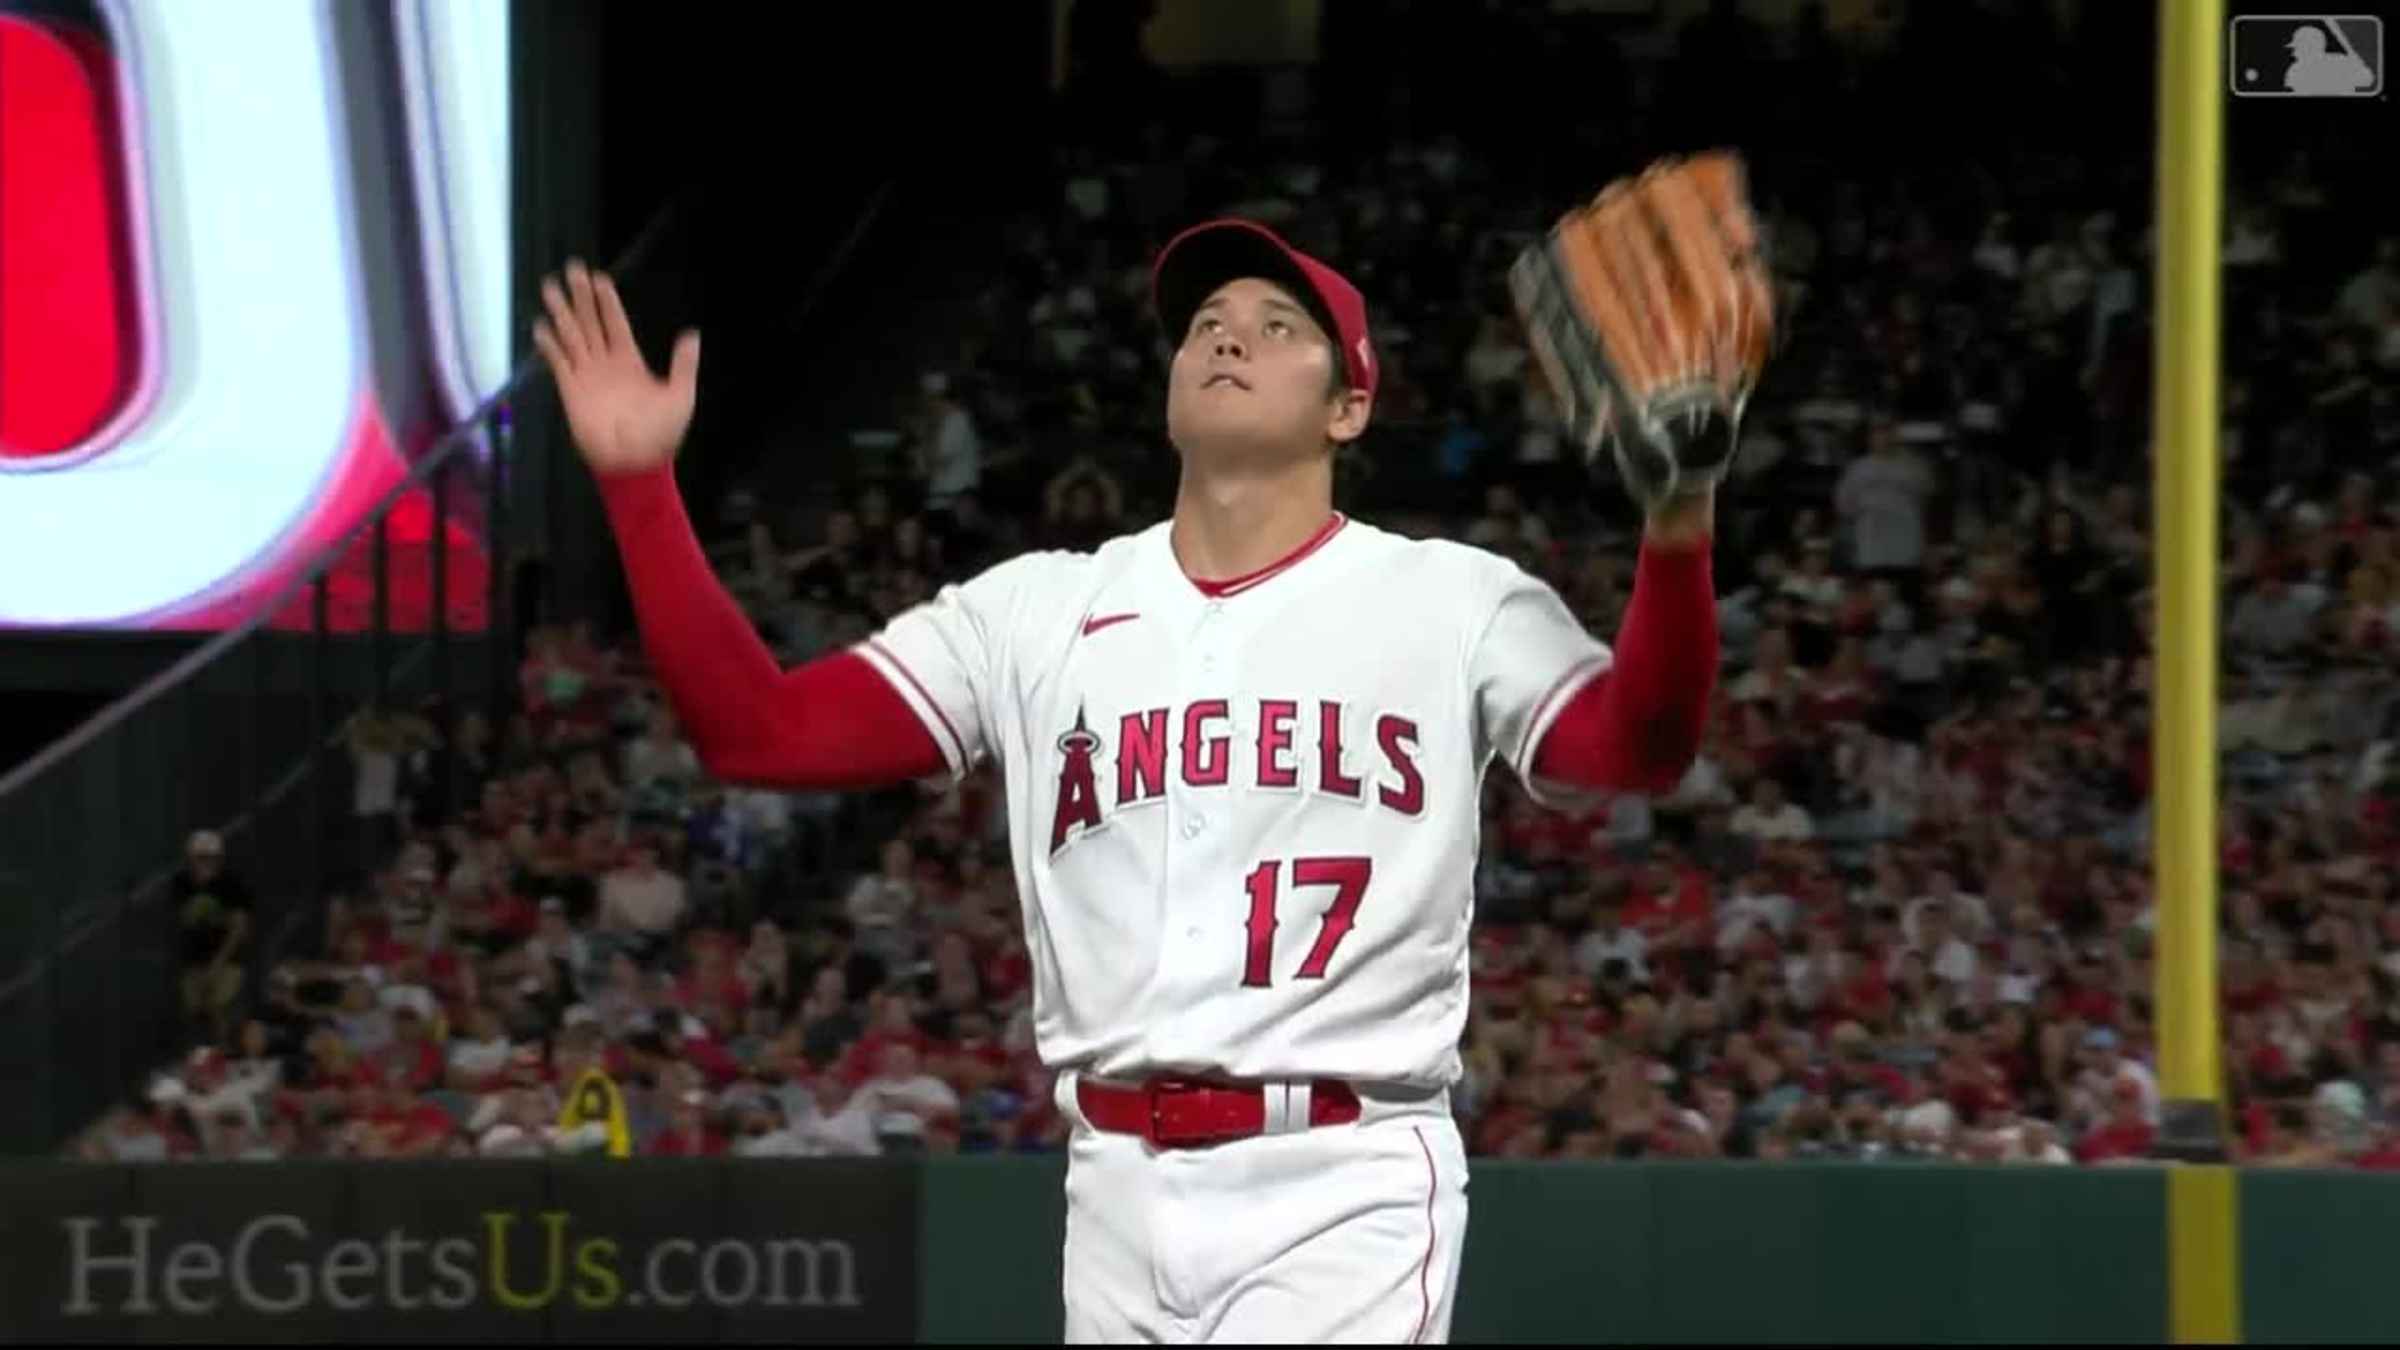 We got to bring these uniforms back. So clean. : r/angelsbaseball